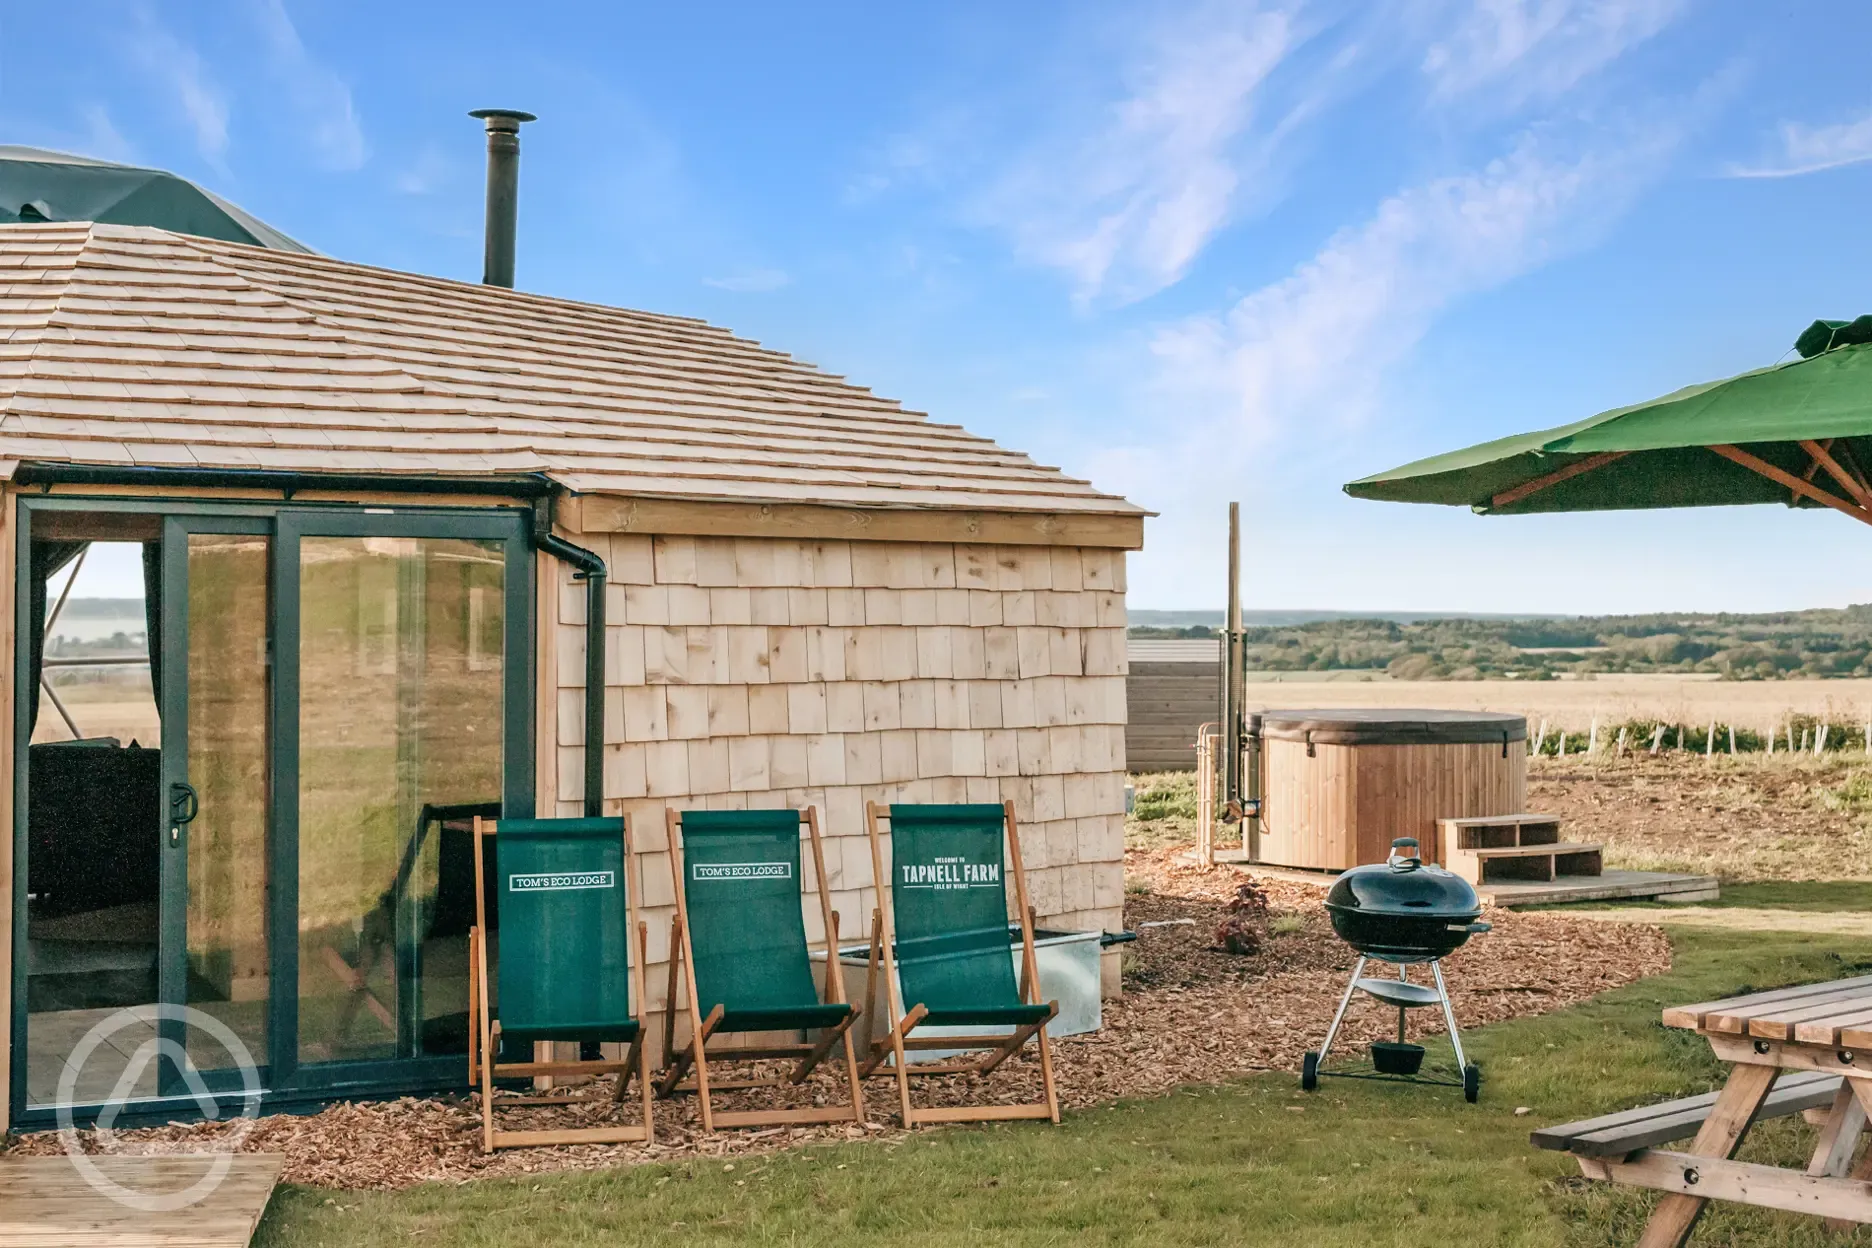 Glamping dome with hot tub